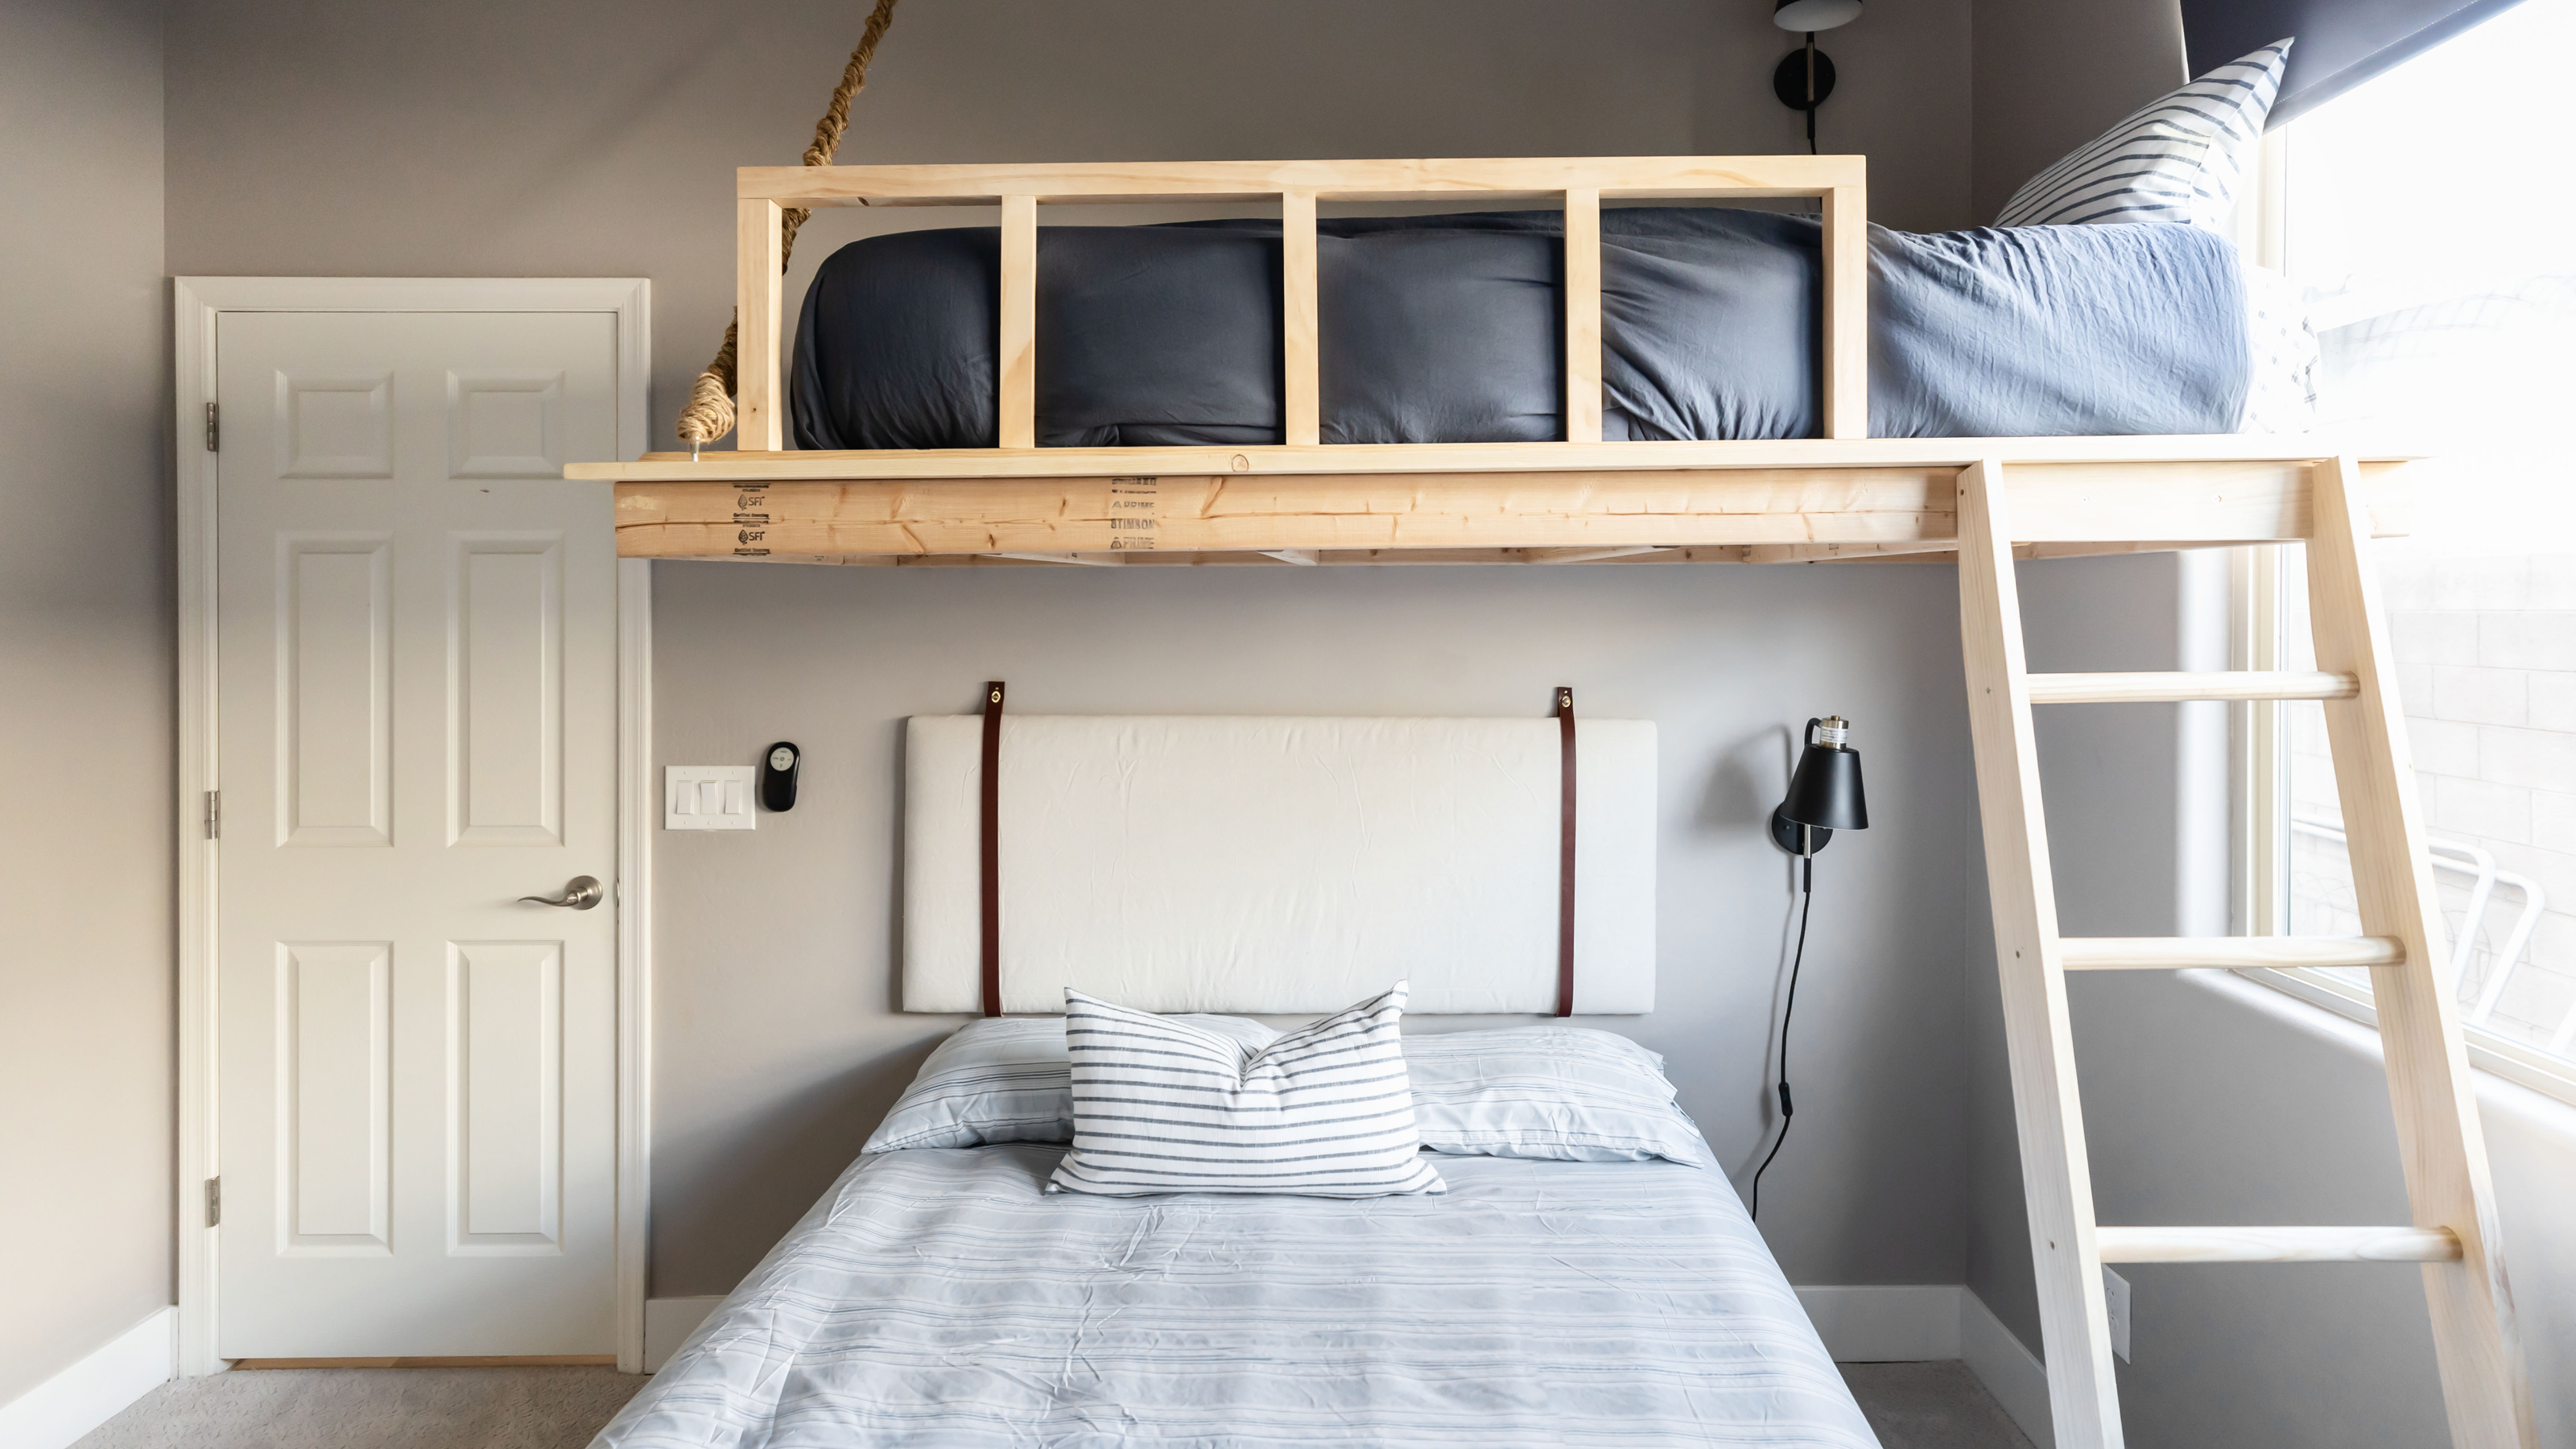 How To Build A Loft Bed Diy With This, How To Attach Bunk Beds Together